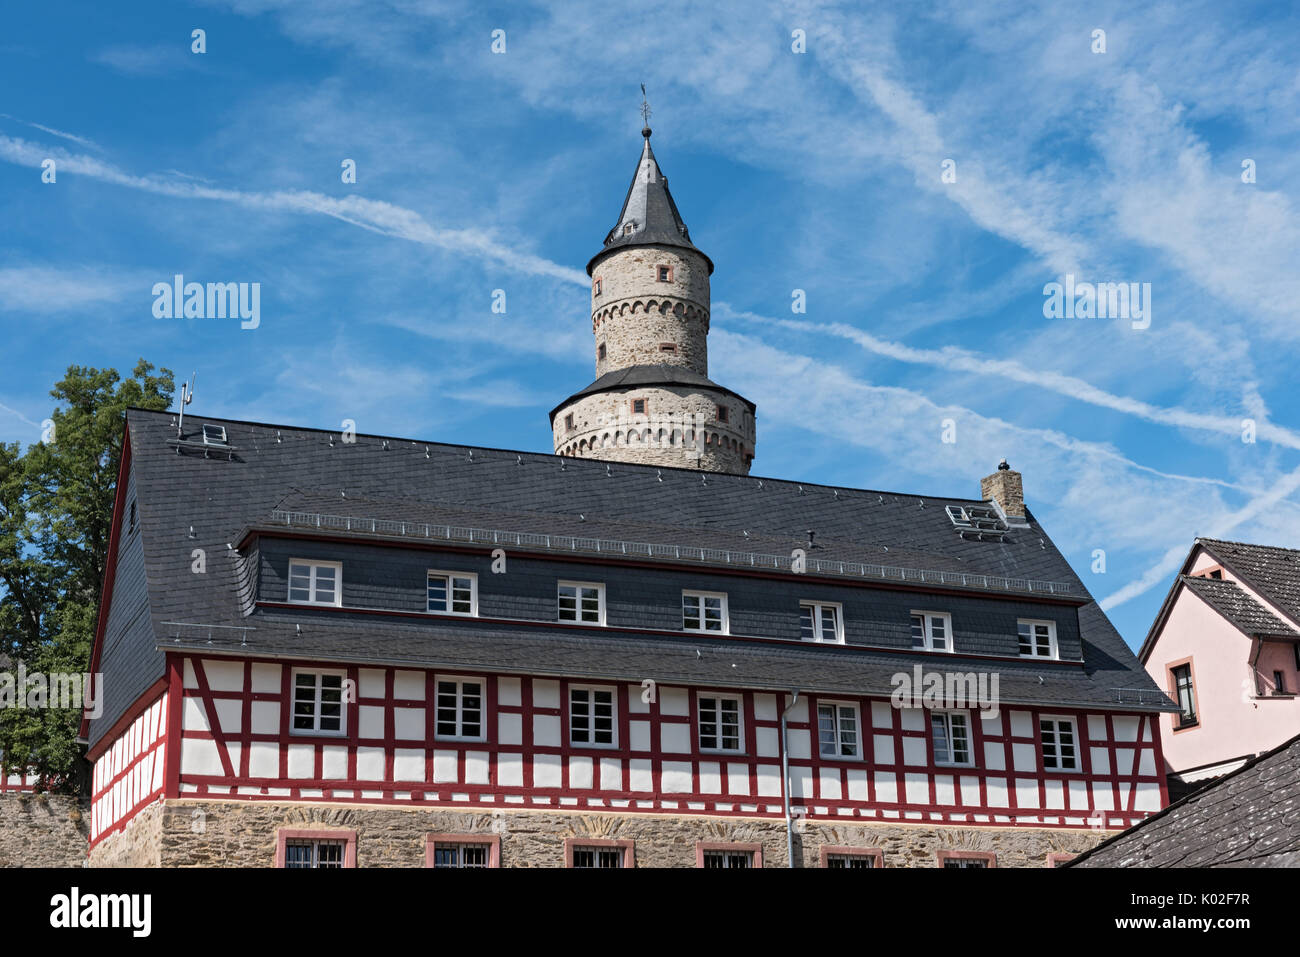 The Renaissance castle Idstein with a witch tower Stock Photo